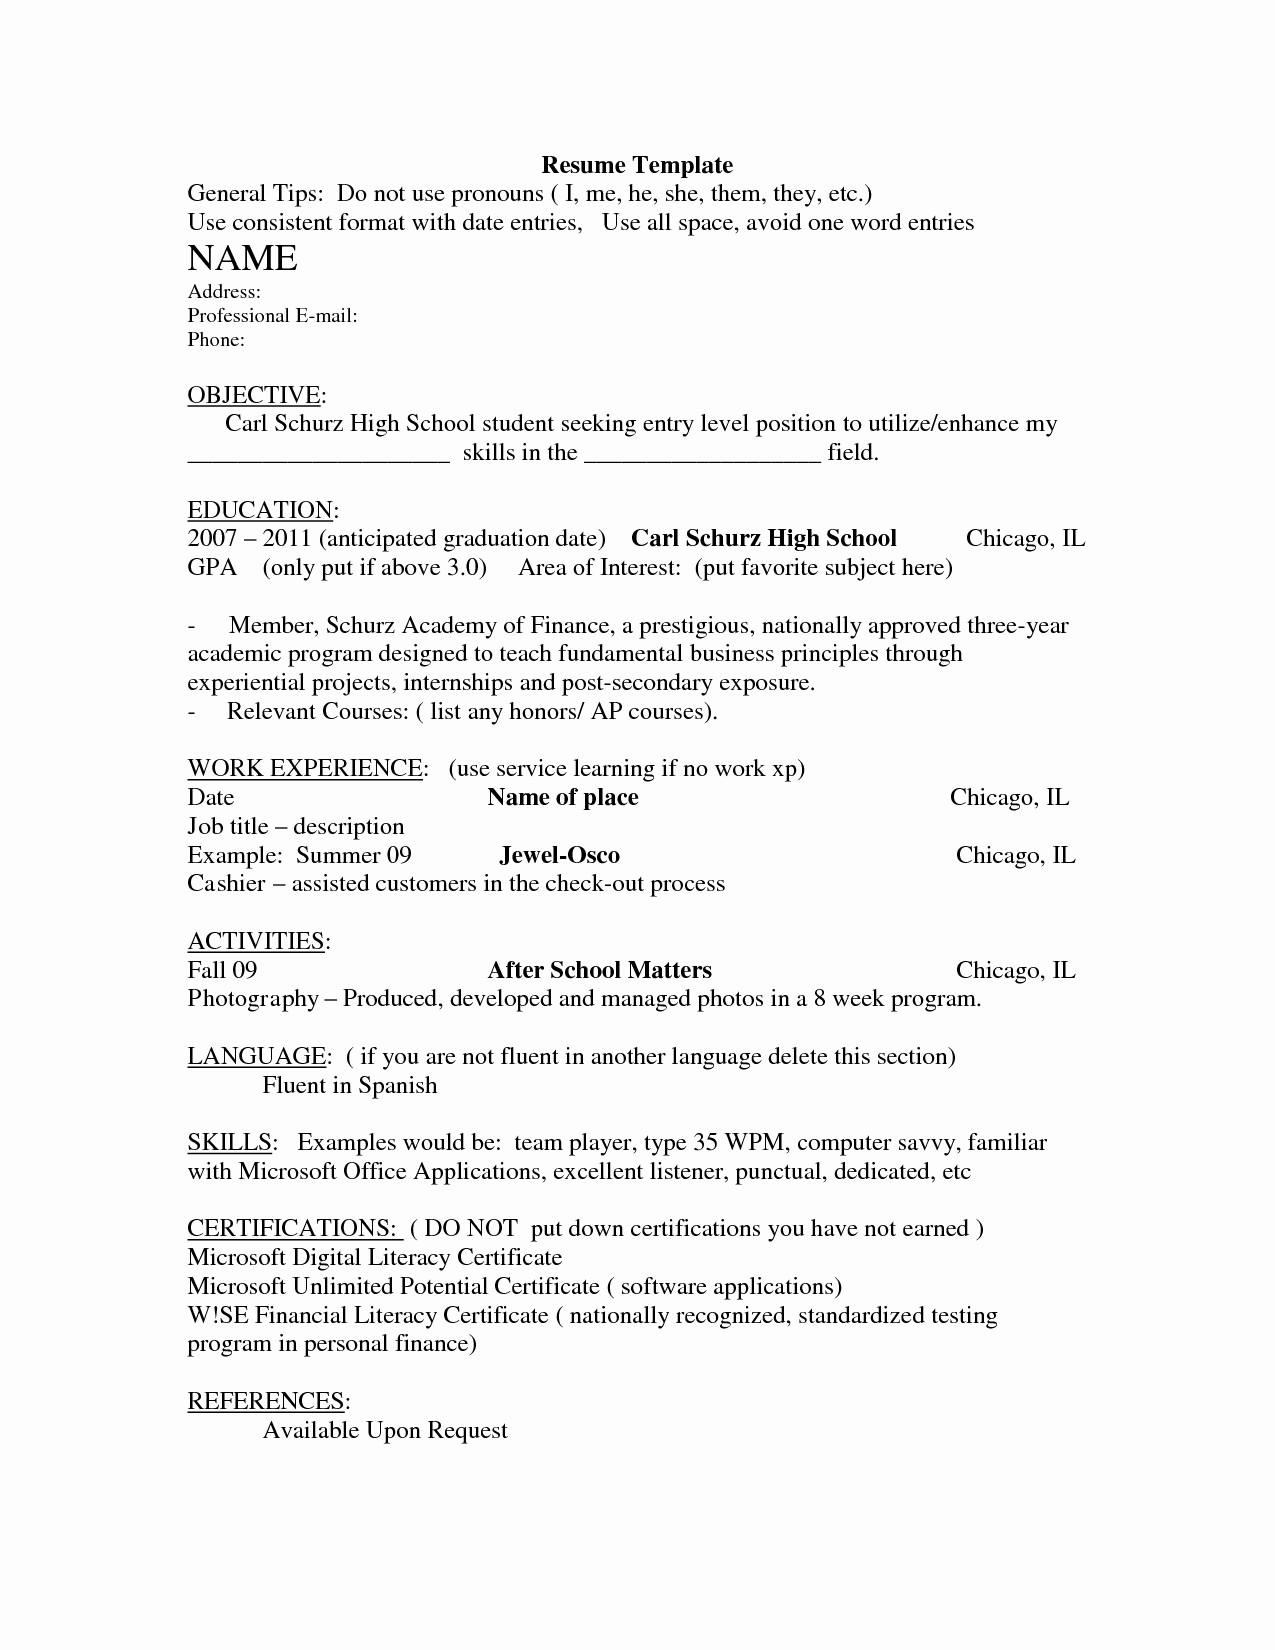 Resumes for High School Students Beautiful Resume for Non High School Graduate Resume Ideas